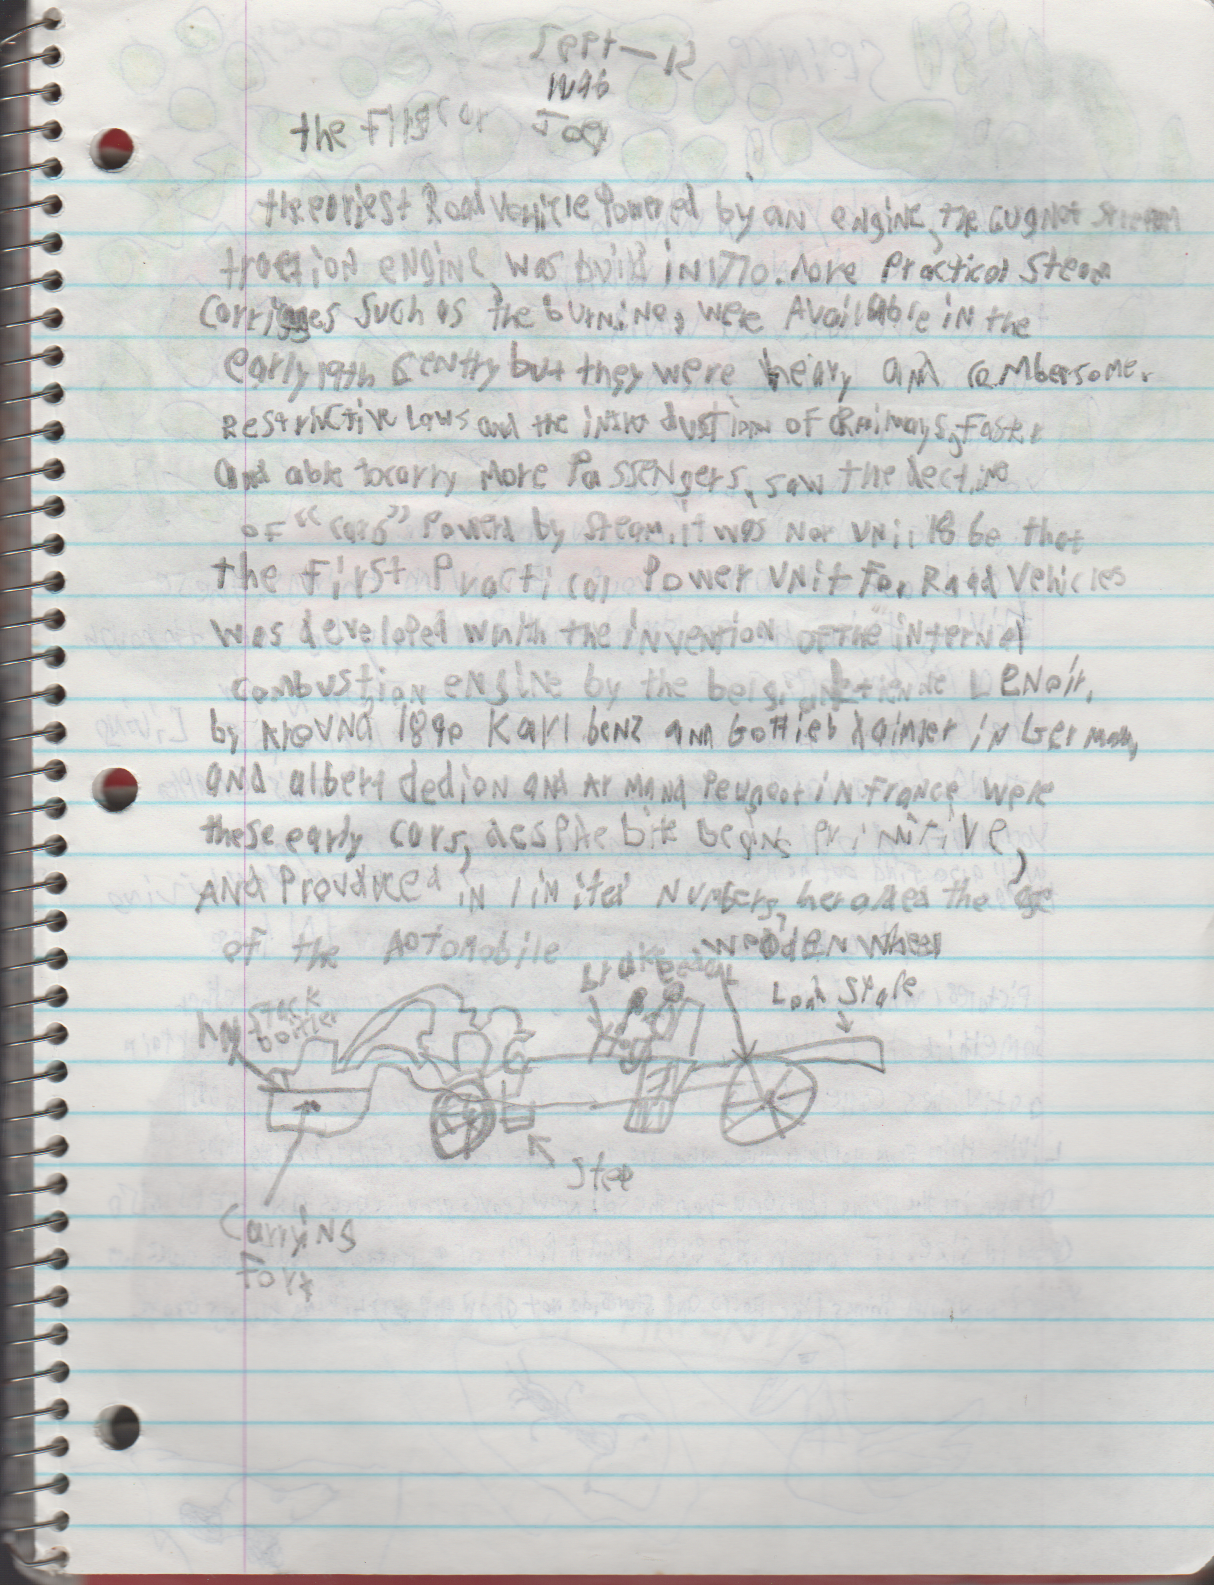 1996-08-18 - Saturday - 11 yr old Joey Arnold's School Book, dates through to 1998 apx, mostly 96, Writings, Drawings, Etc-014 ok.png